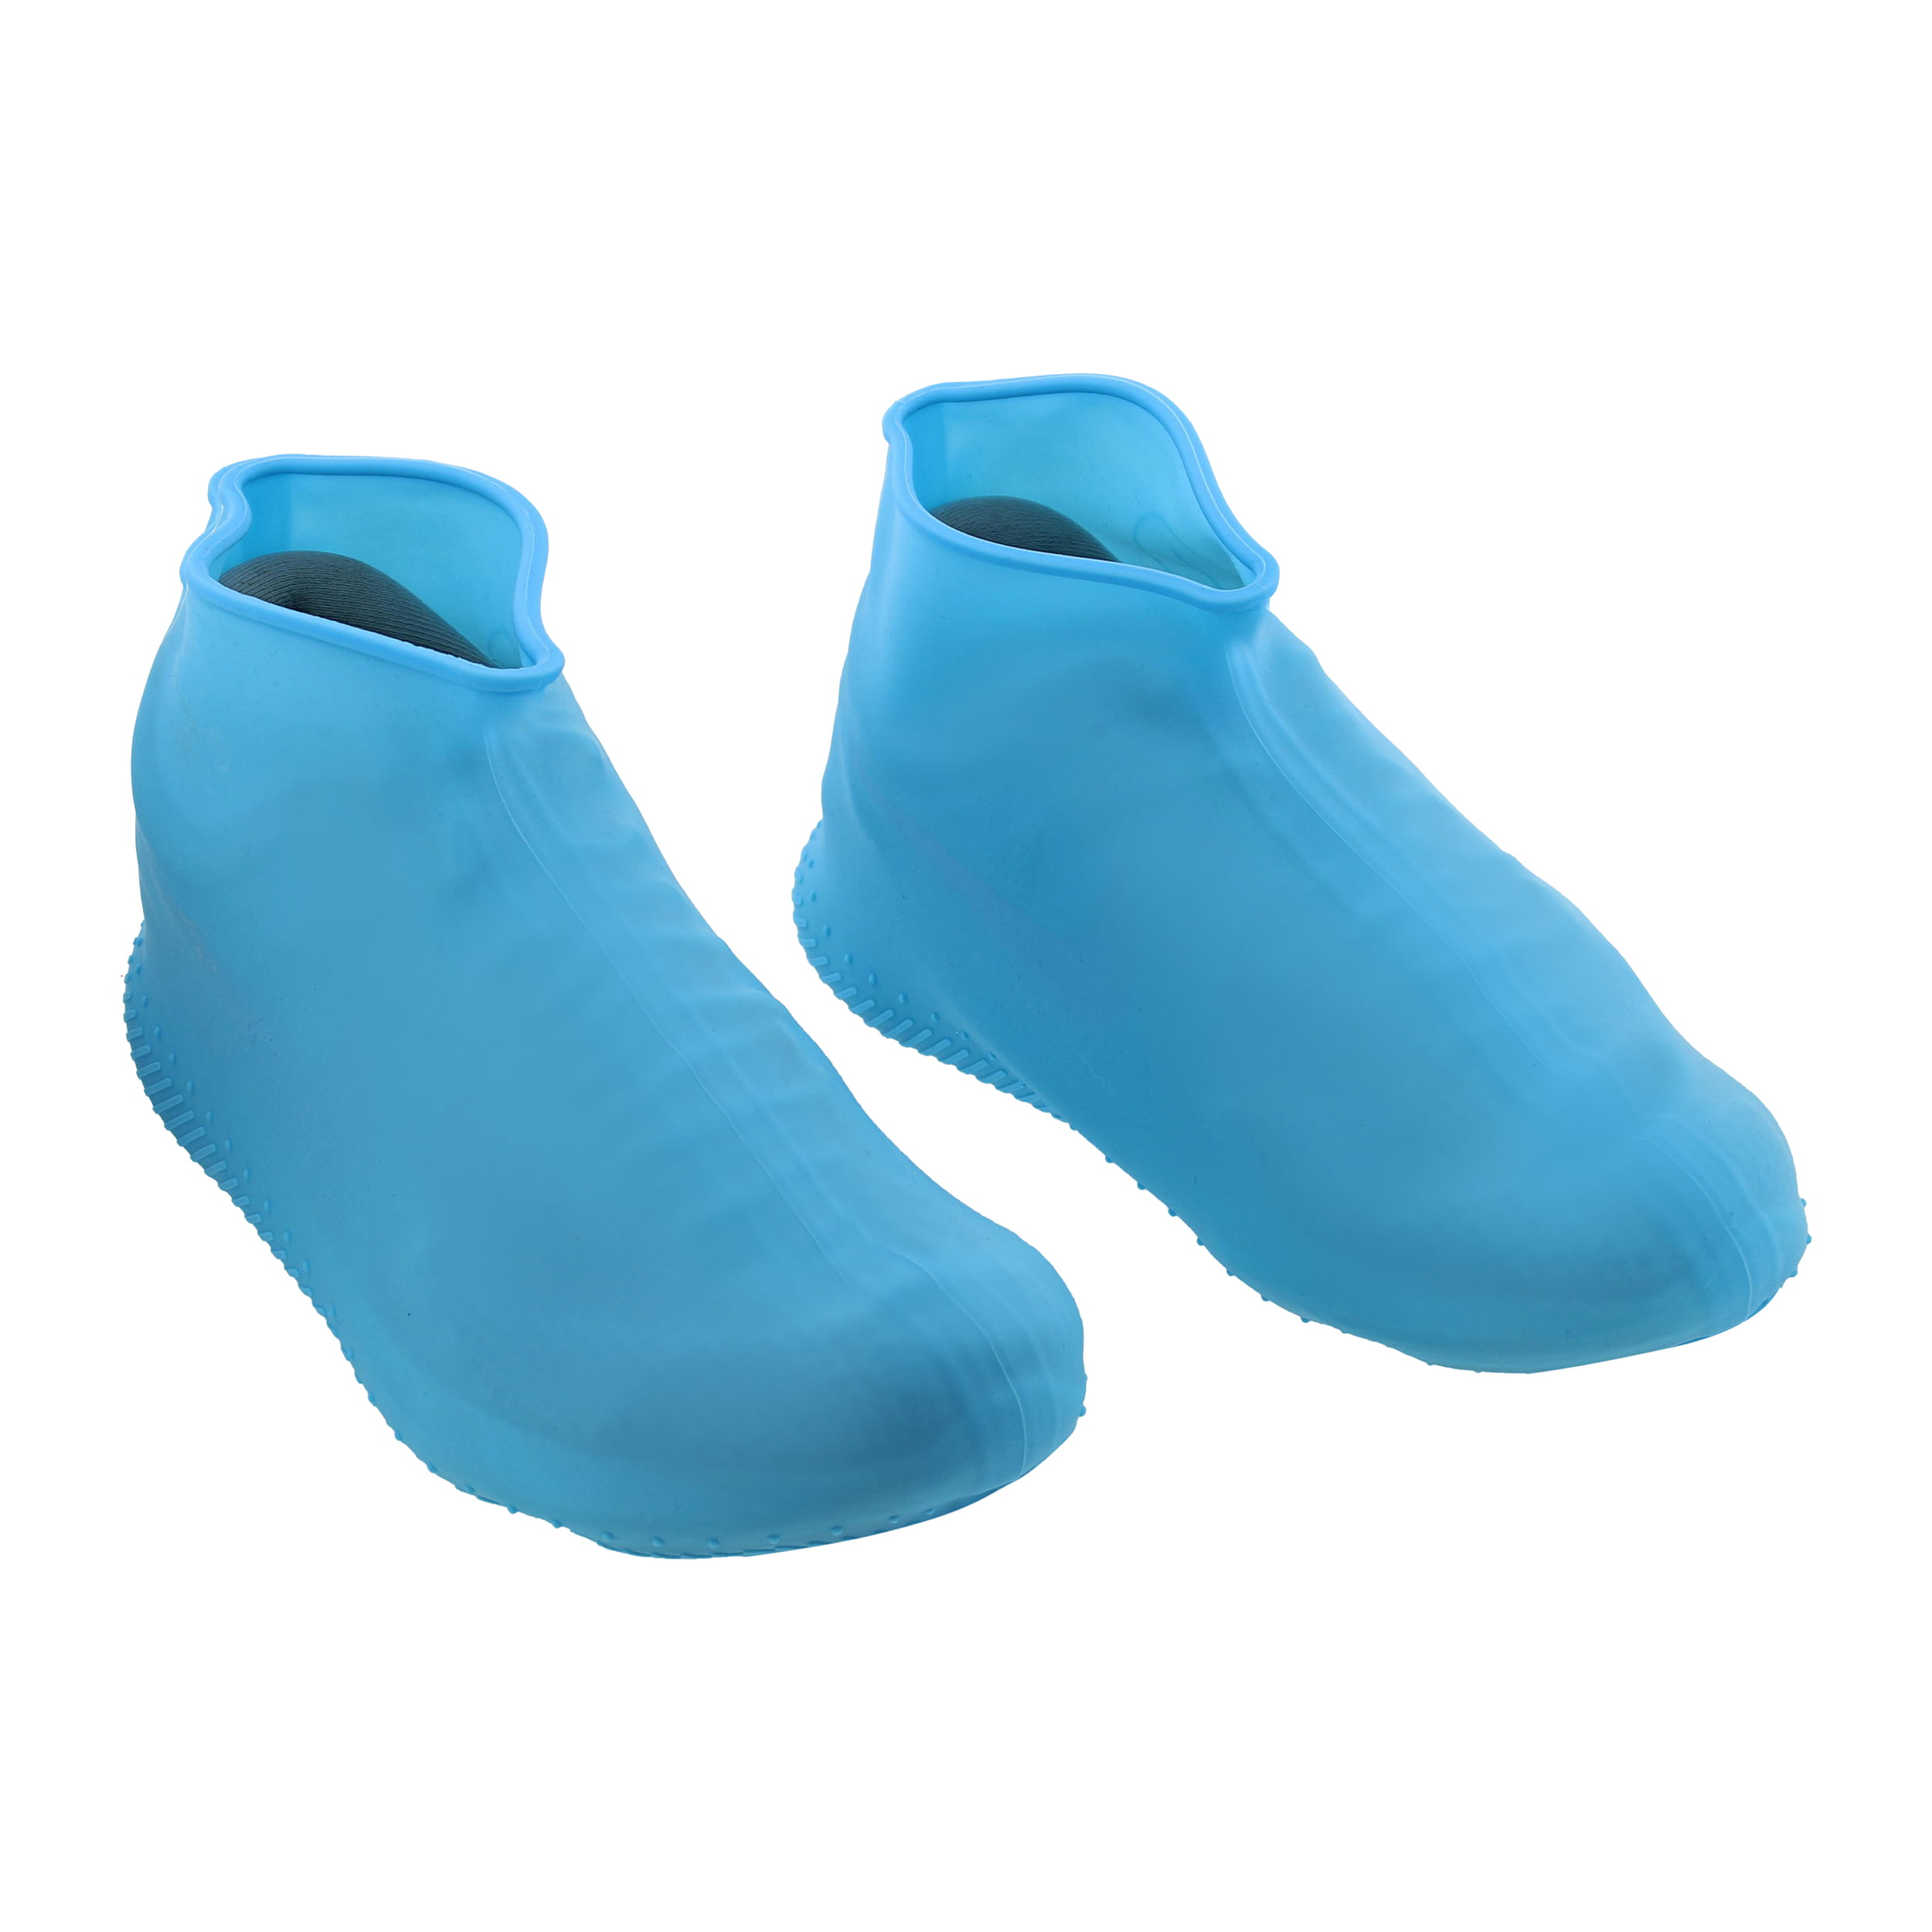 Get Out! Silicone Shoe Covers Reusable Rain Galoshes for Women Shoe 4.5 ...